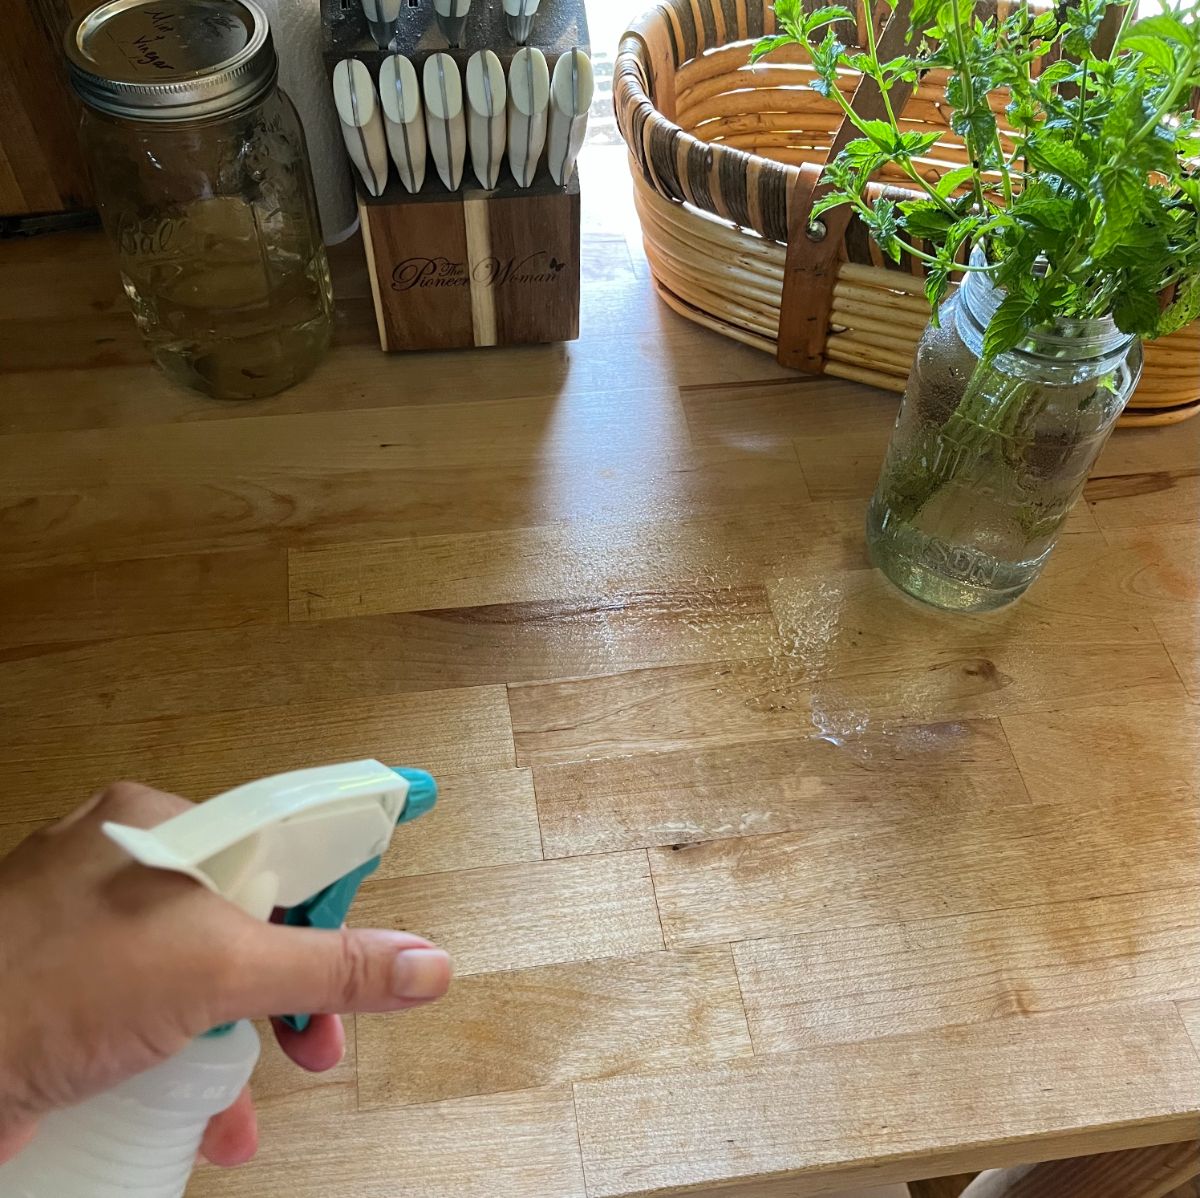 A woman spraying mint vinegar cleaner on a countertop